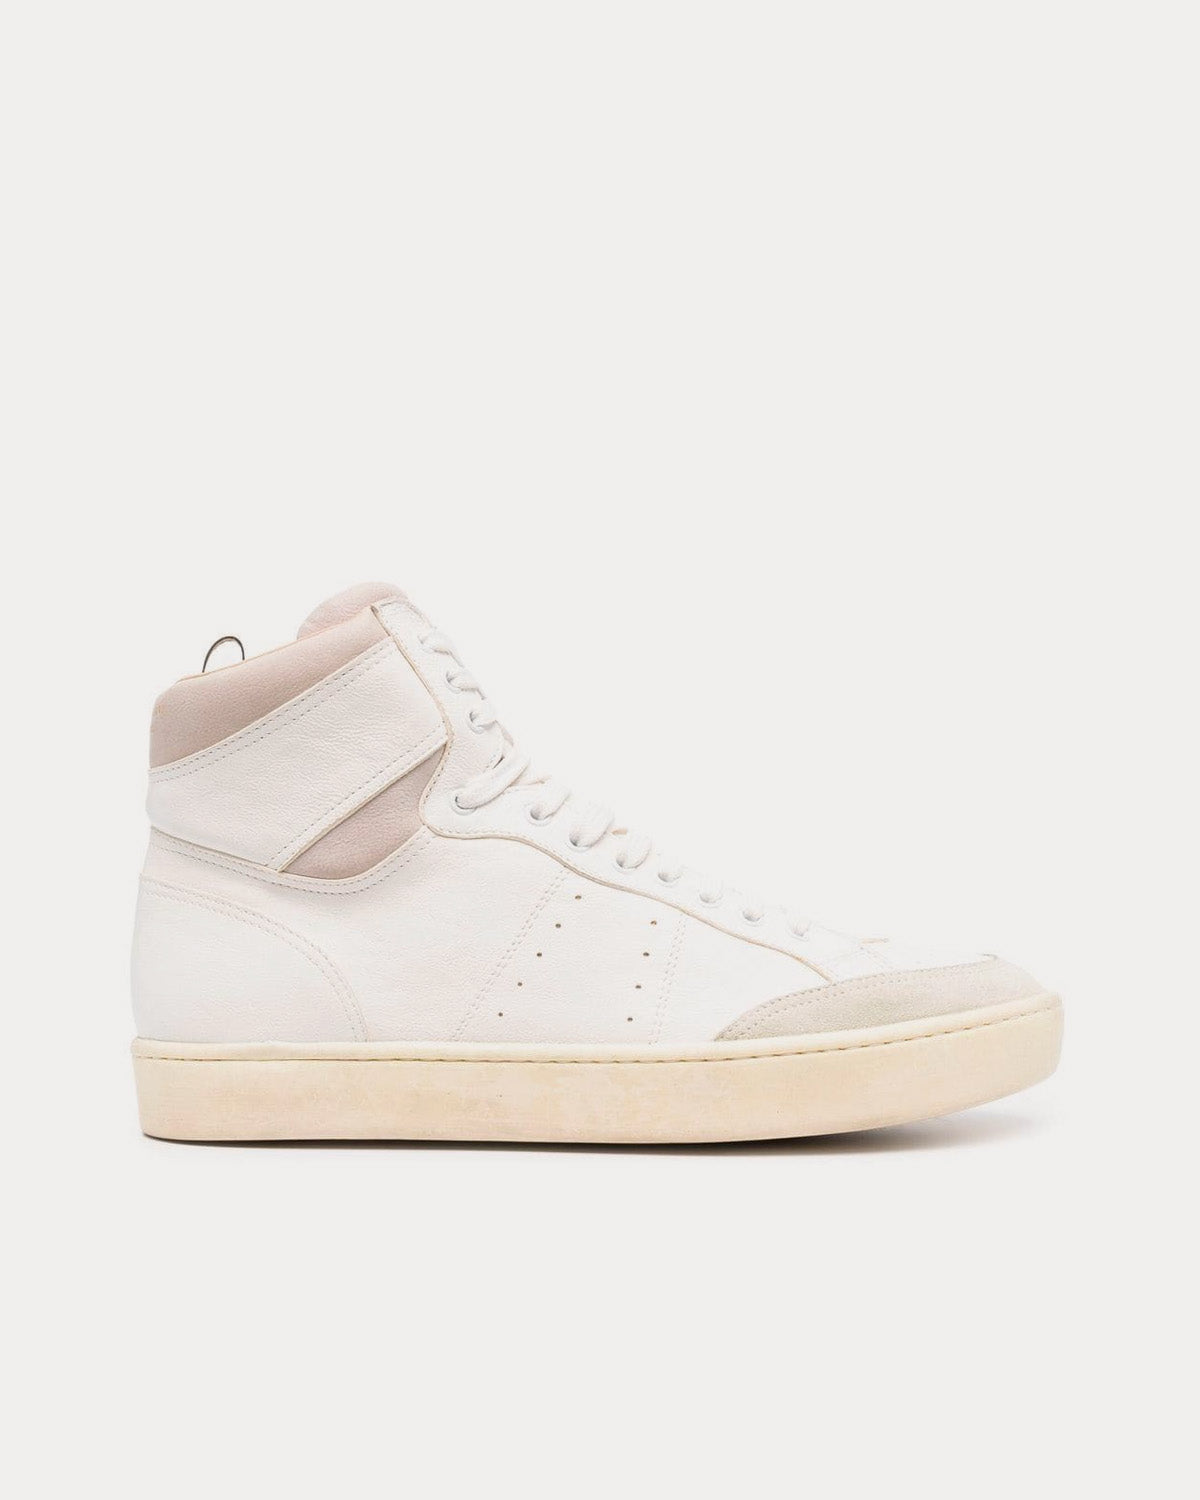 Officine Creative - Knight 005 White / Grey High Top Sneakers